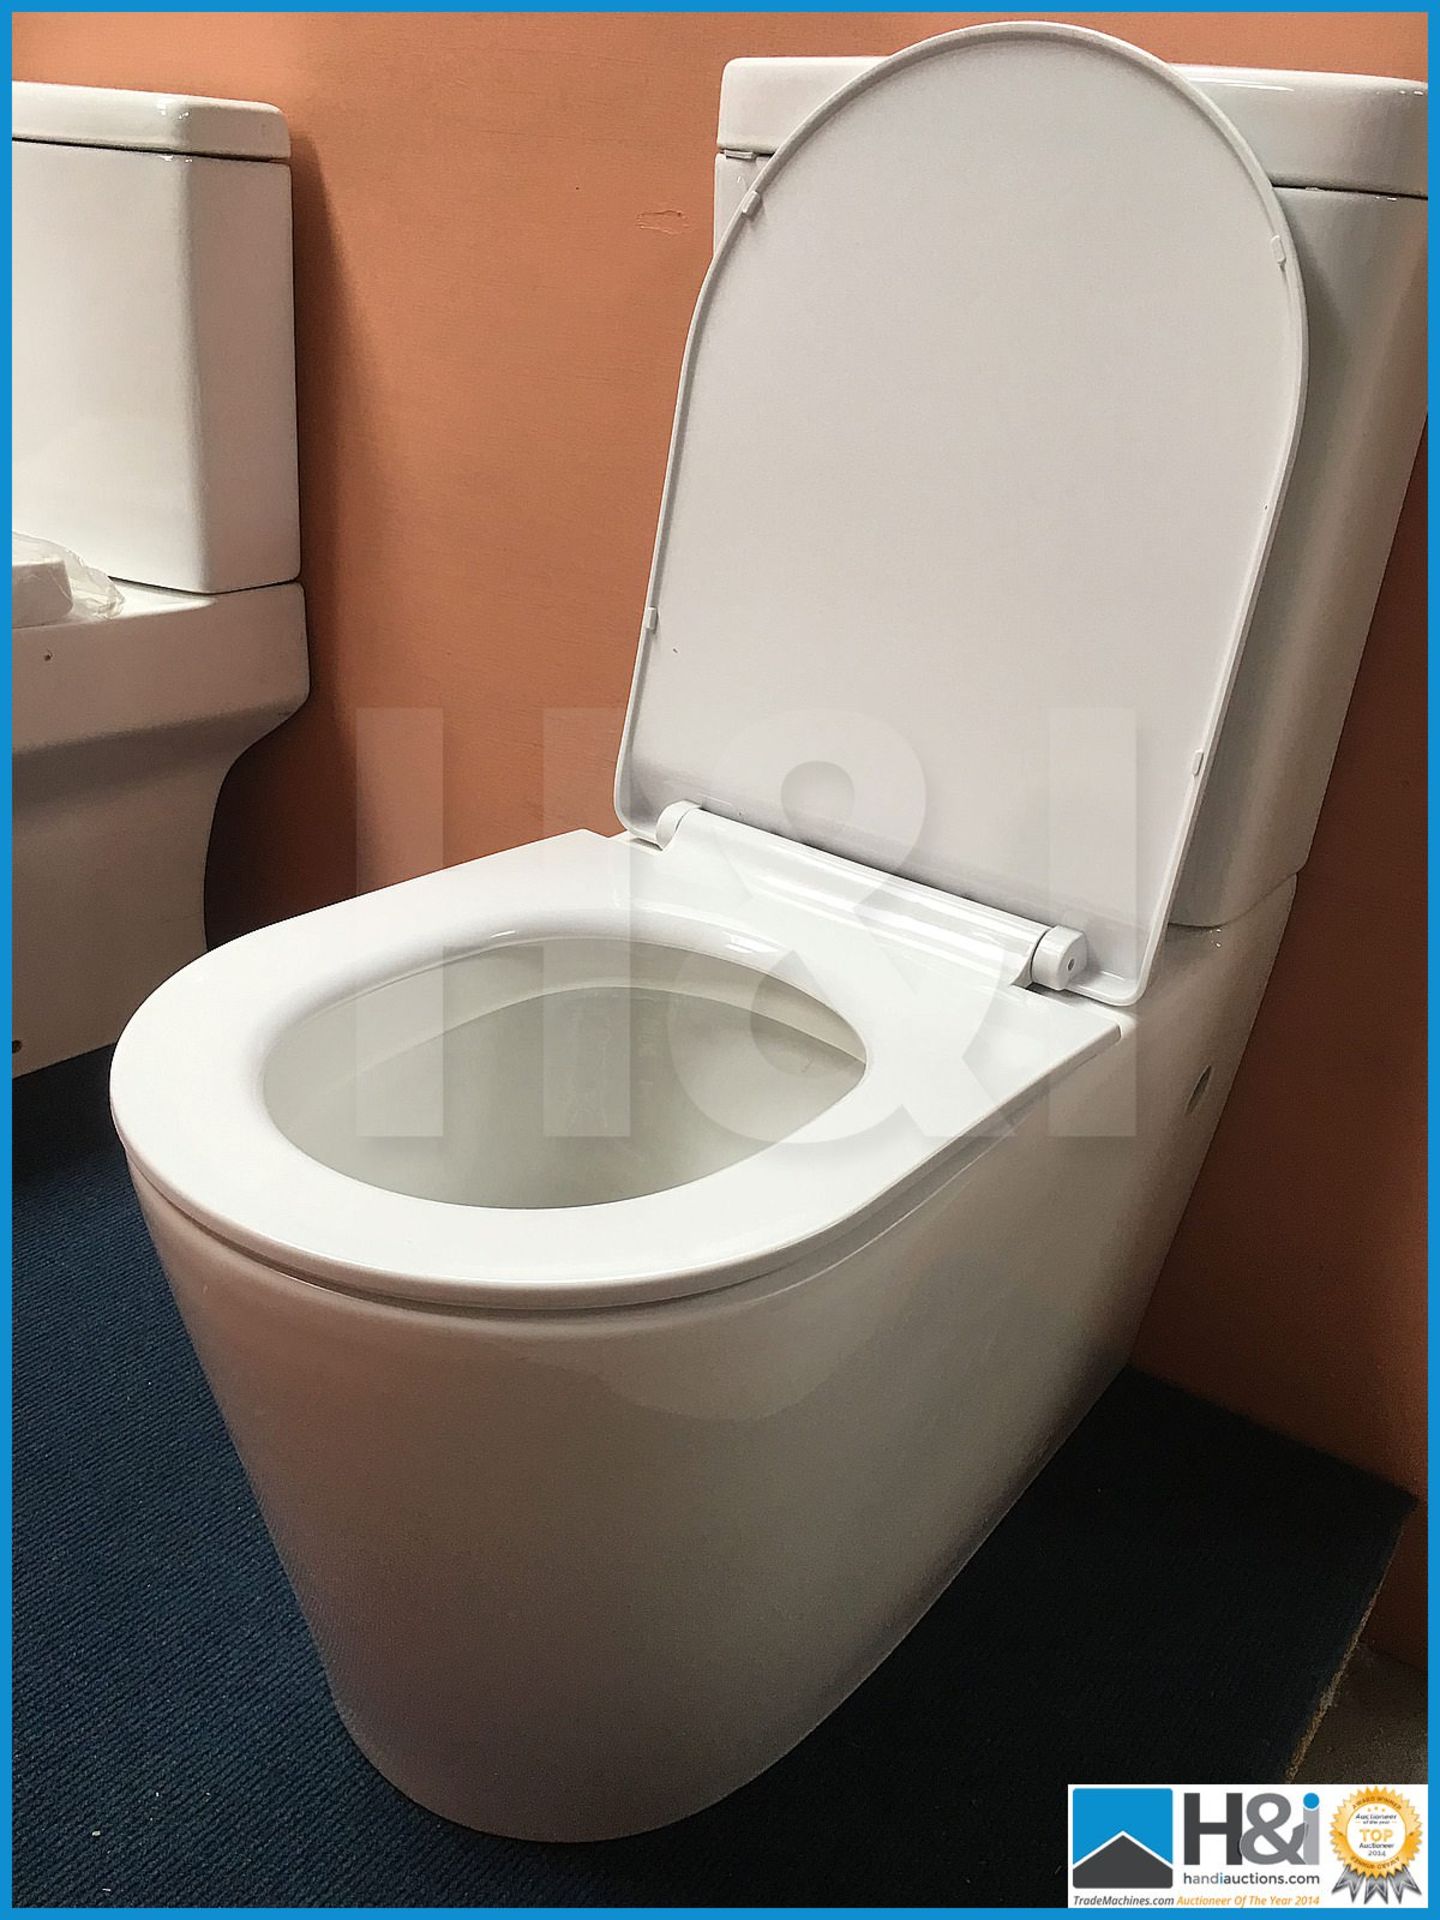 Designer K008 full fascia WC with complimenting thin sandwich soft close seat compete with valve mec - Image 4 of 4